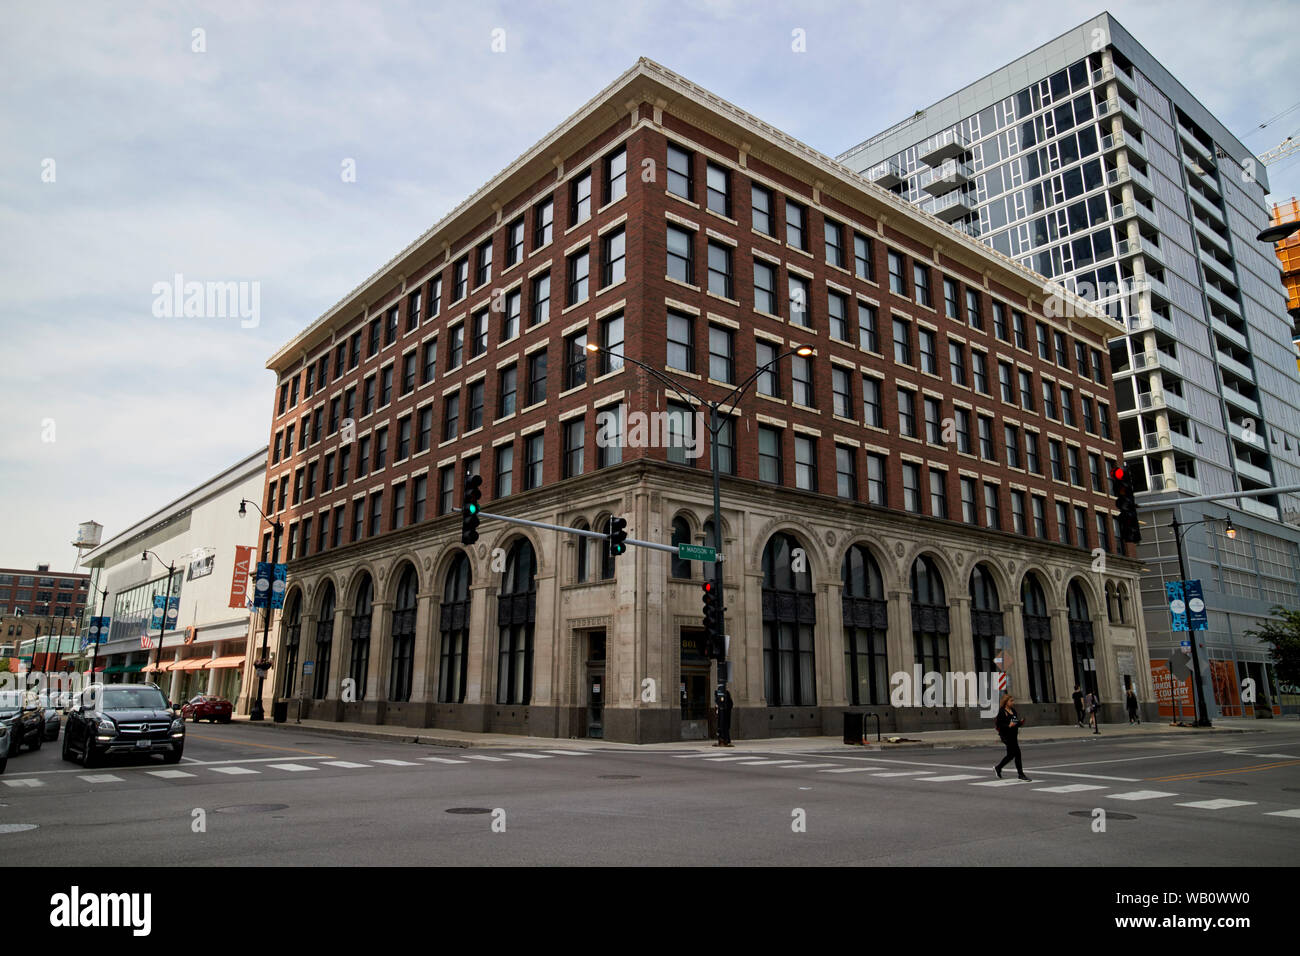 801 west madison street former mid-city trust and savings bank building chicago illinois united states of america Stock Photo